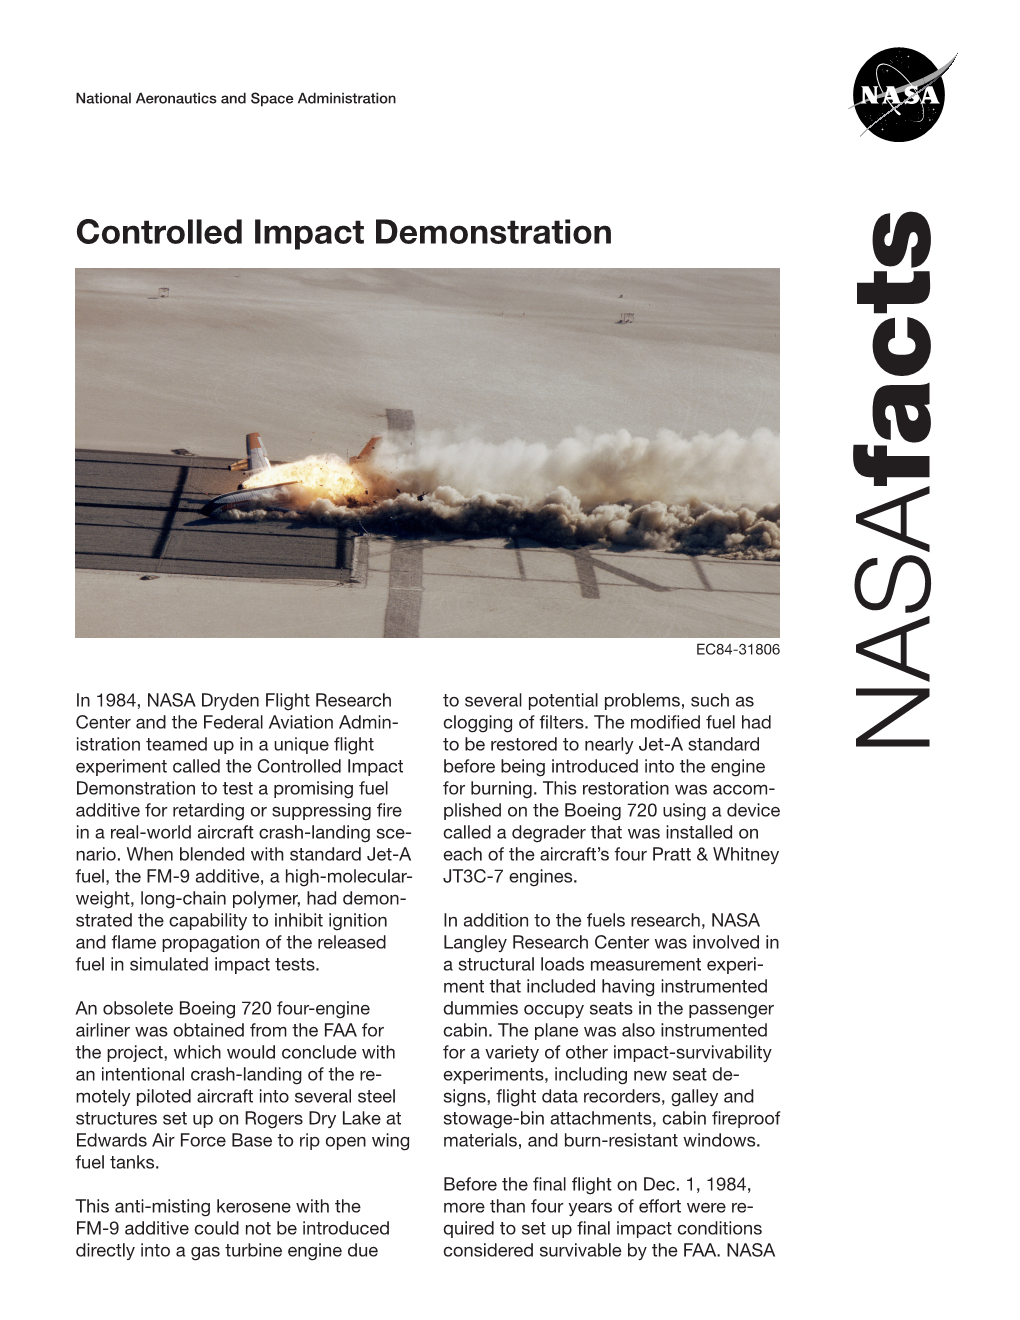 Controlled Impact Demonstration